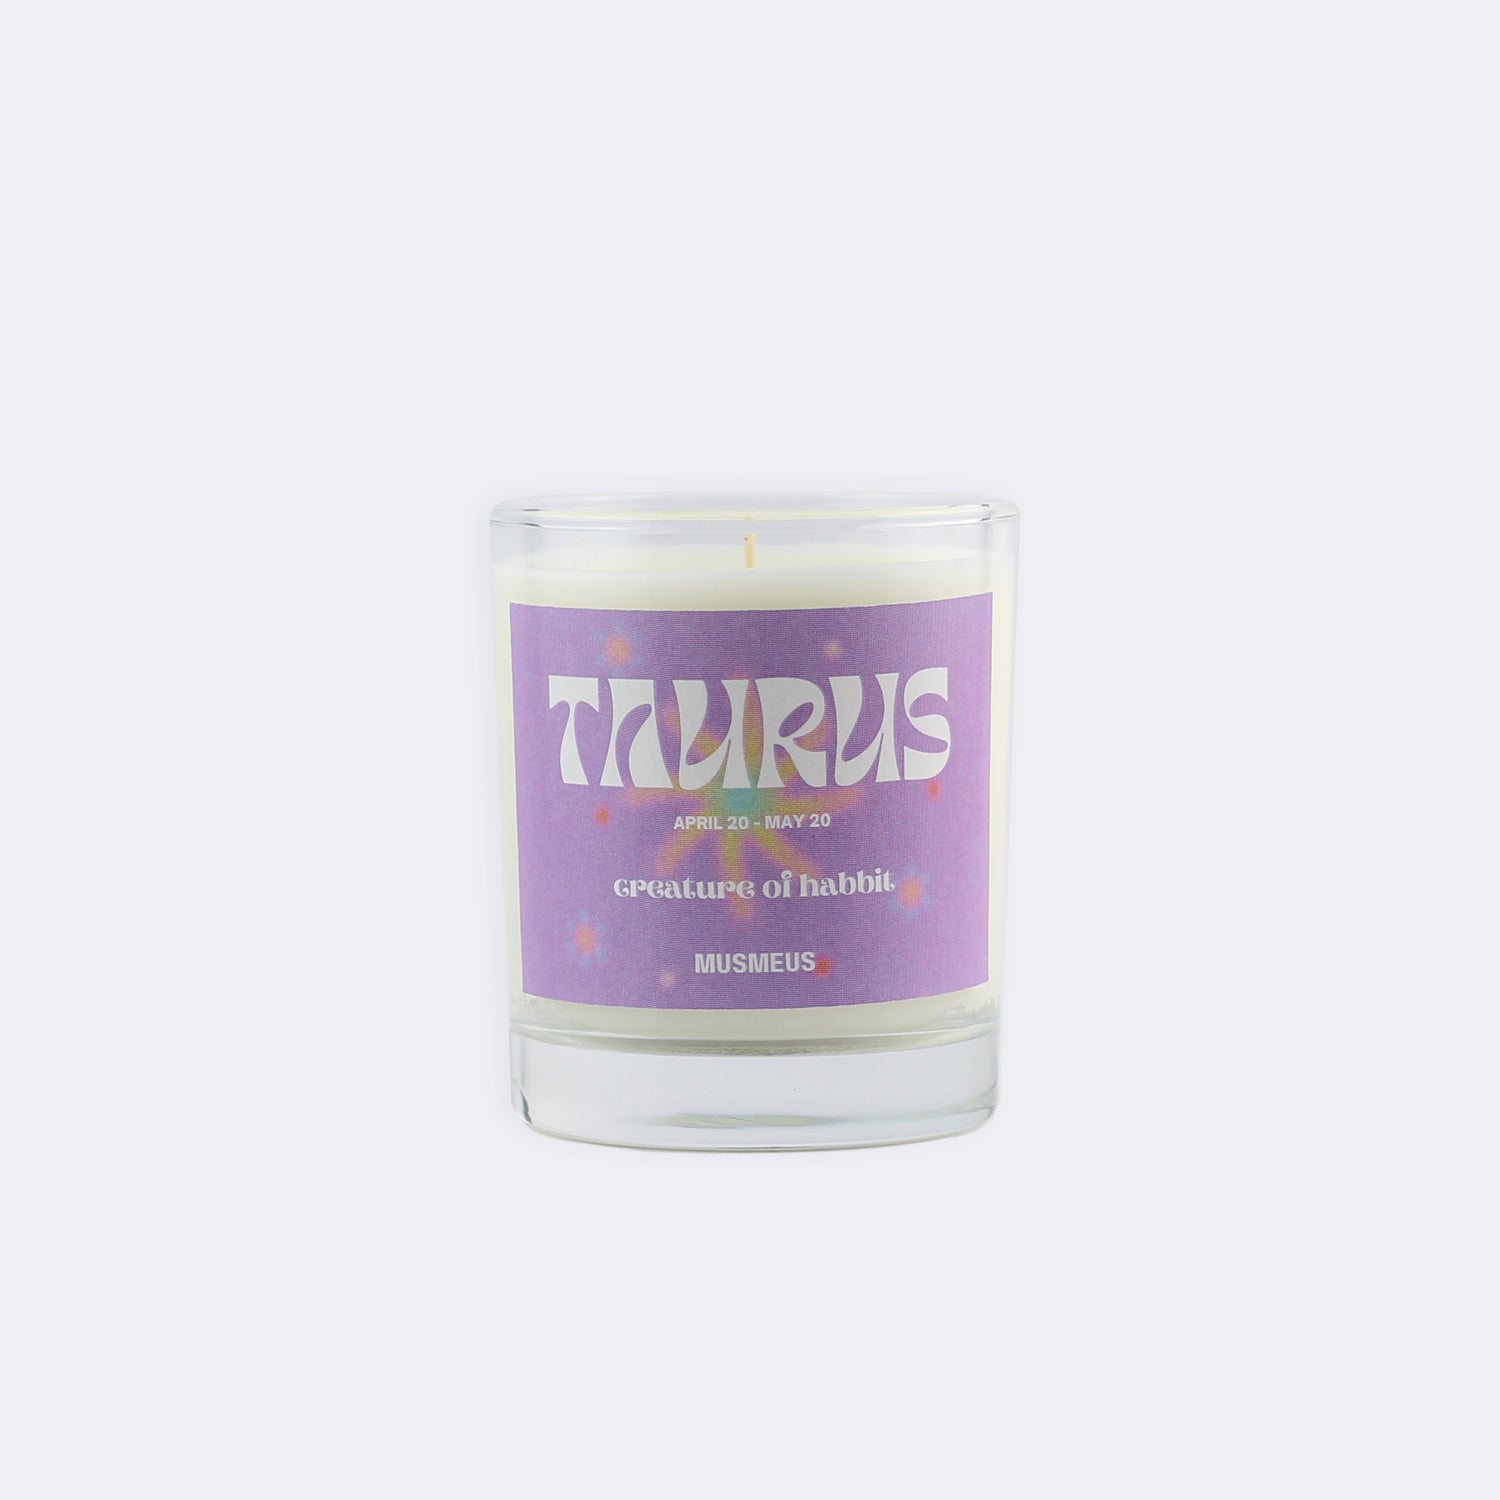 Taurus Soy Wax Scented Candle